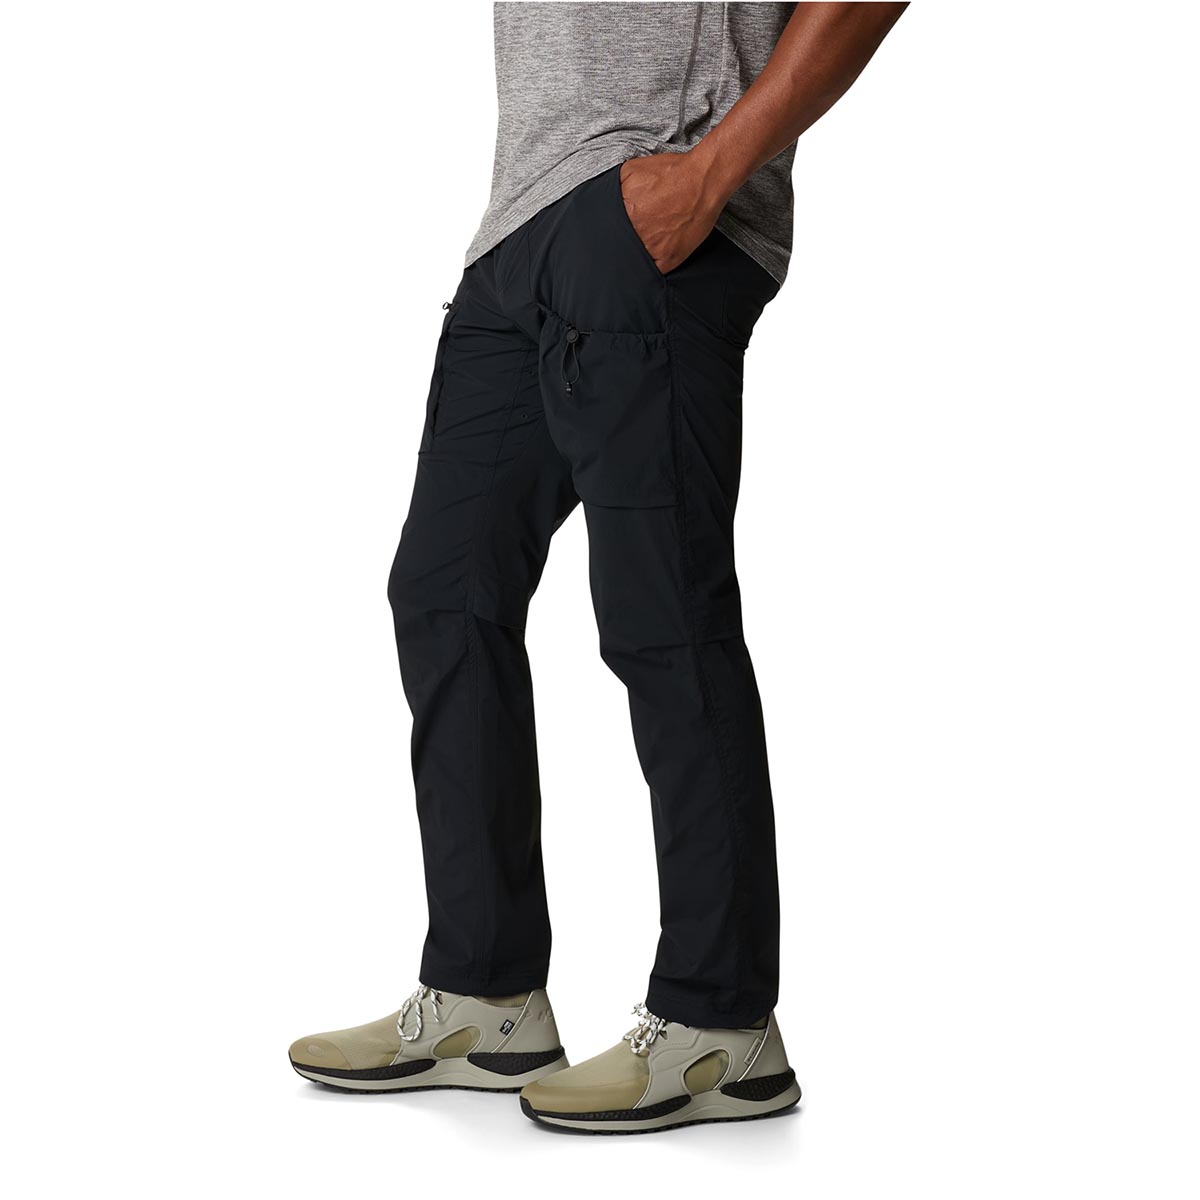 COLUMBIA - MAXTRAIL LITE NOVELTY PANT